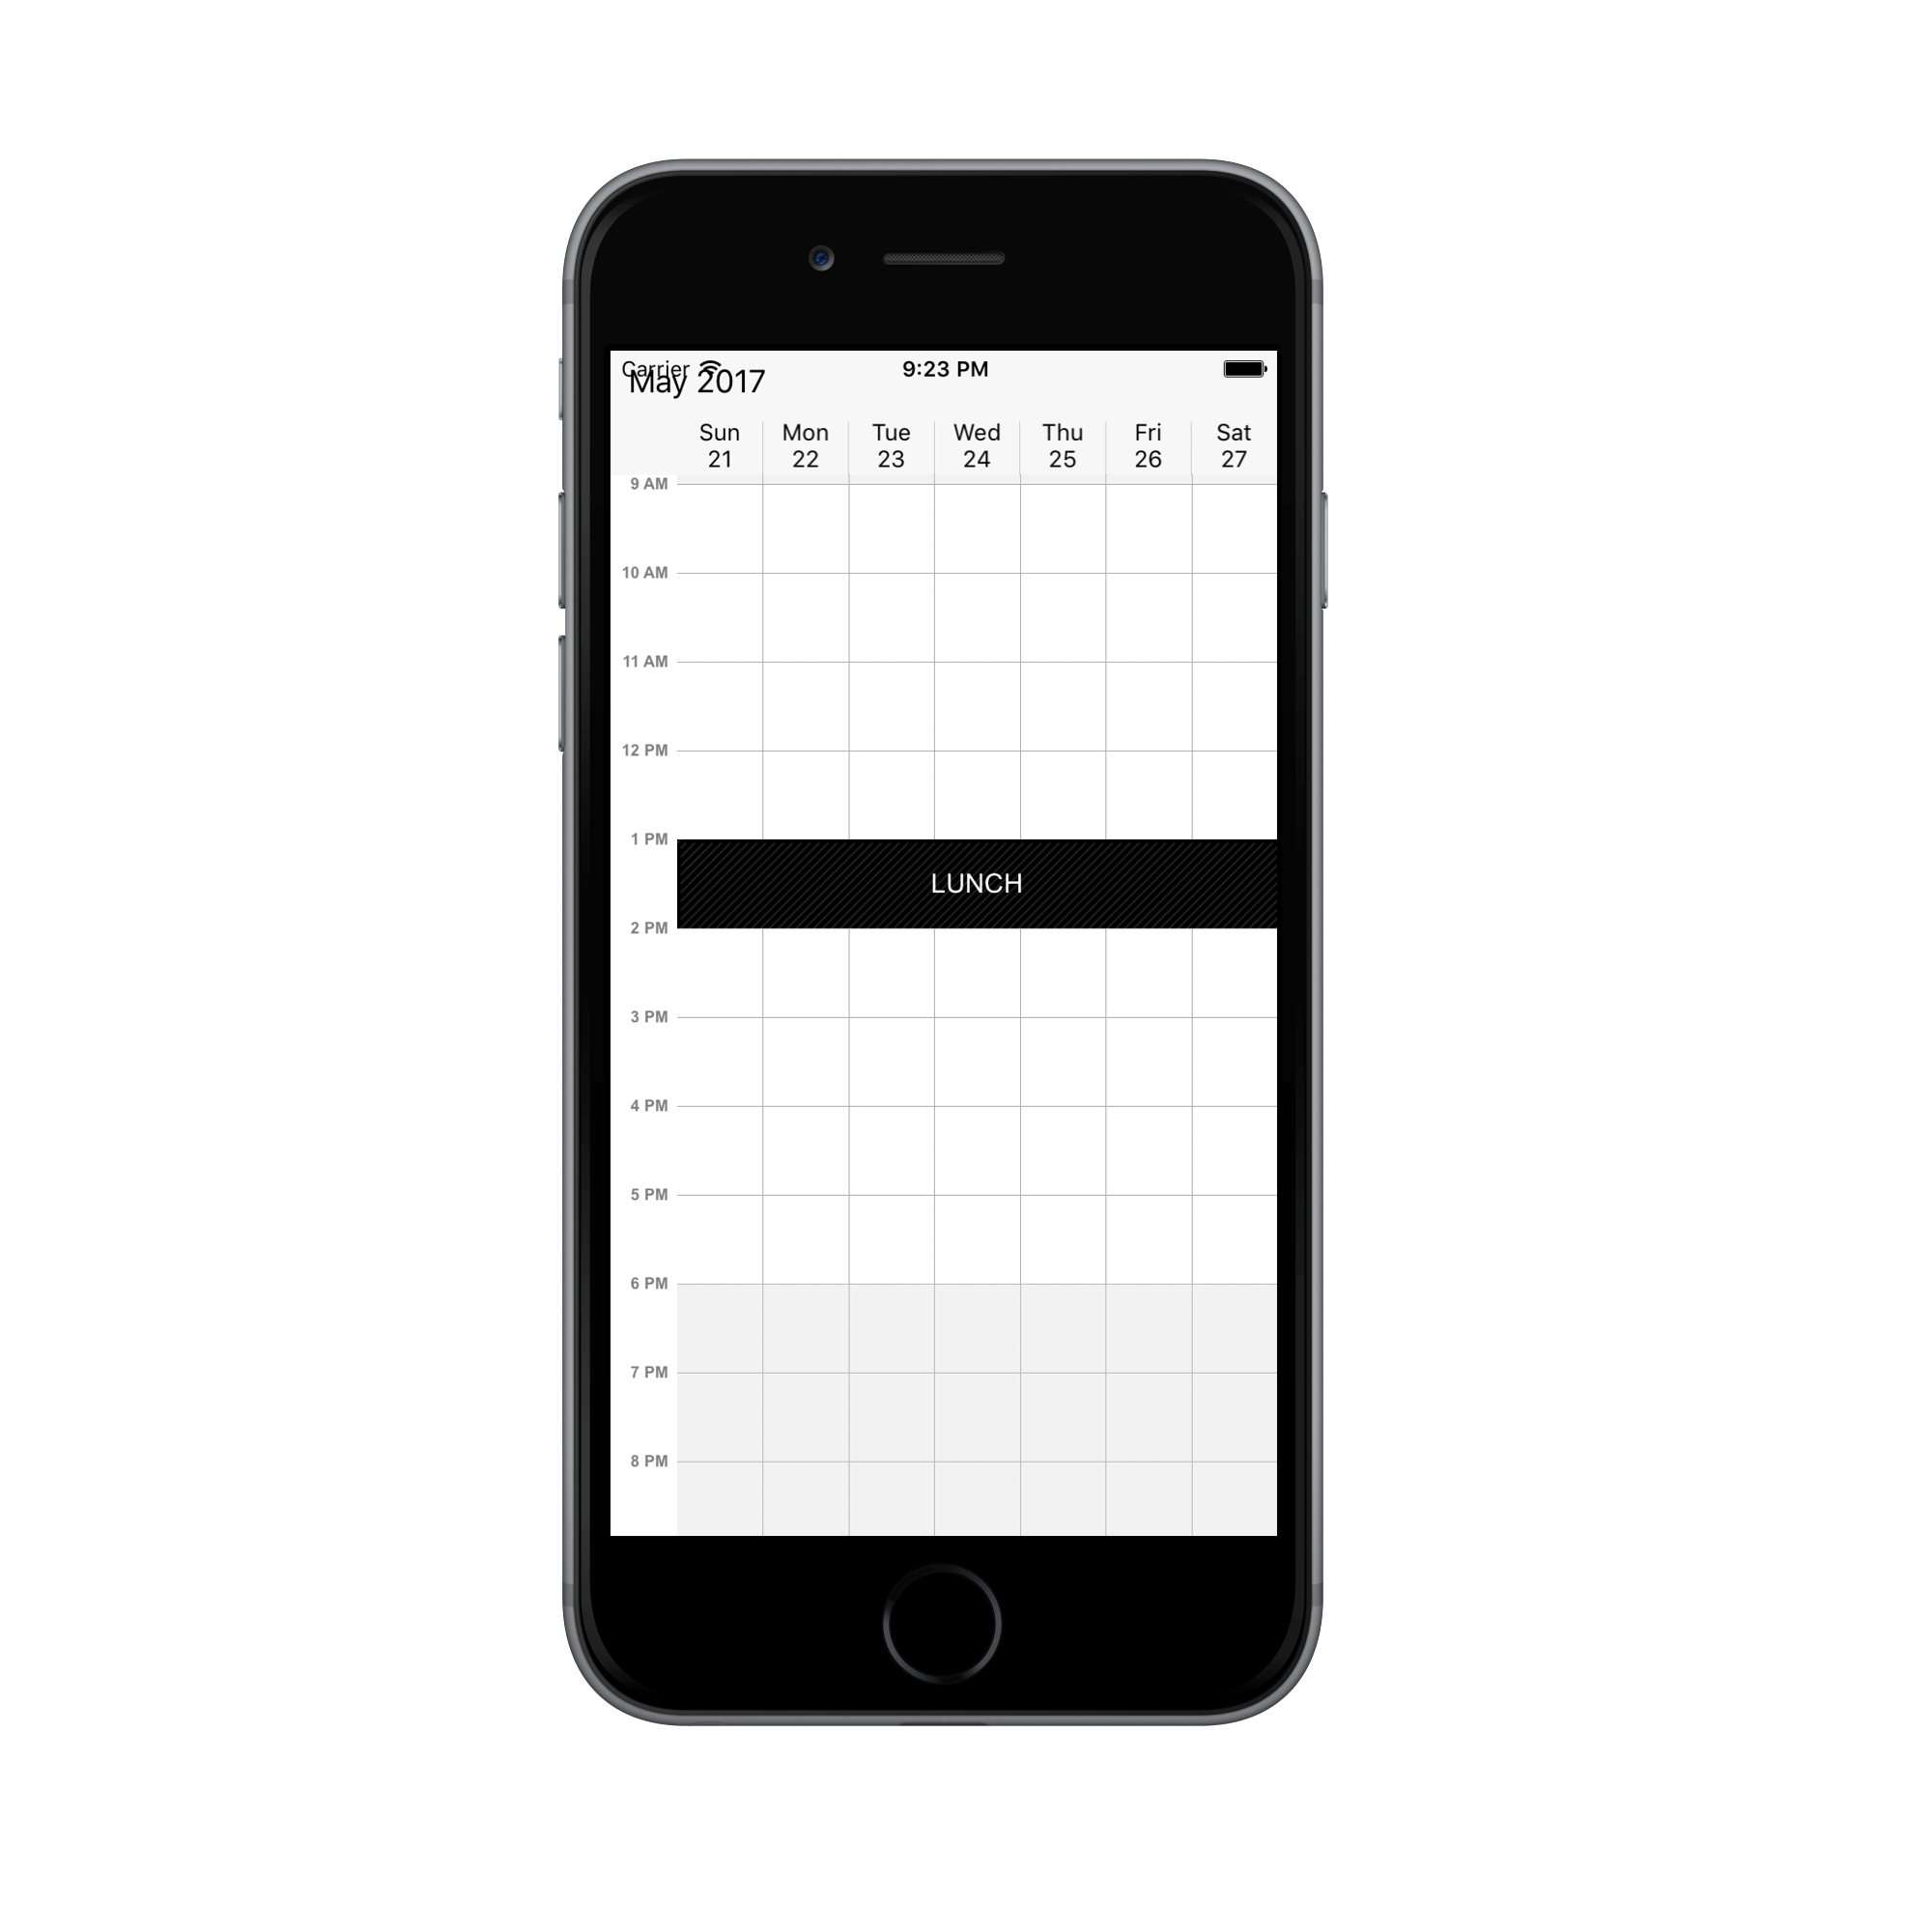 Non accessible block support in schedule week view for Xamarin.iOS